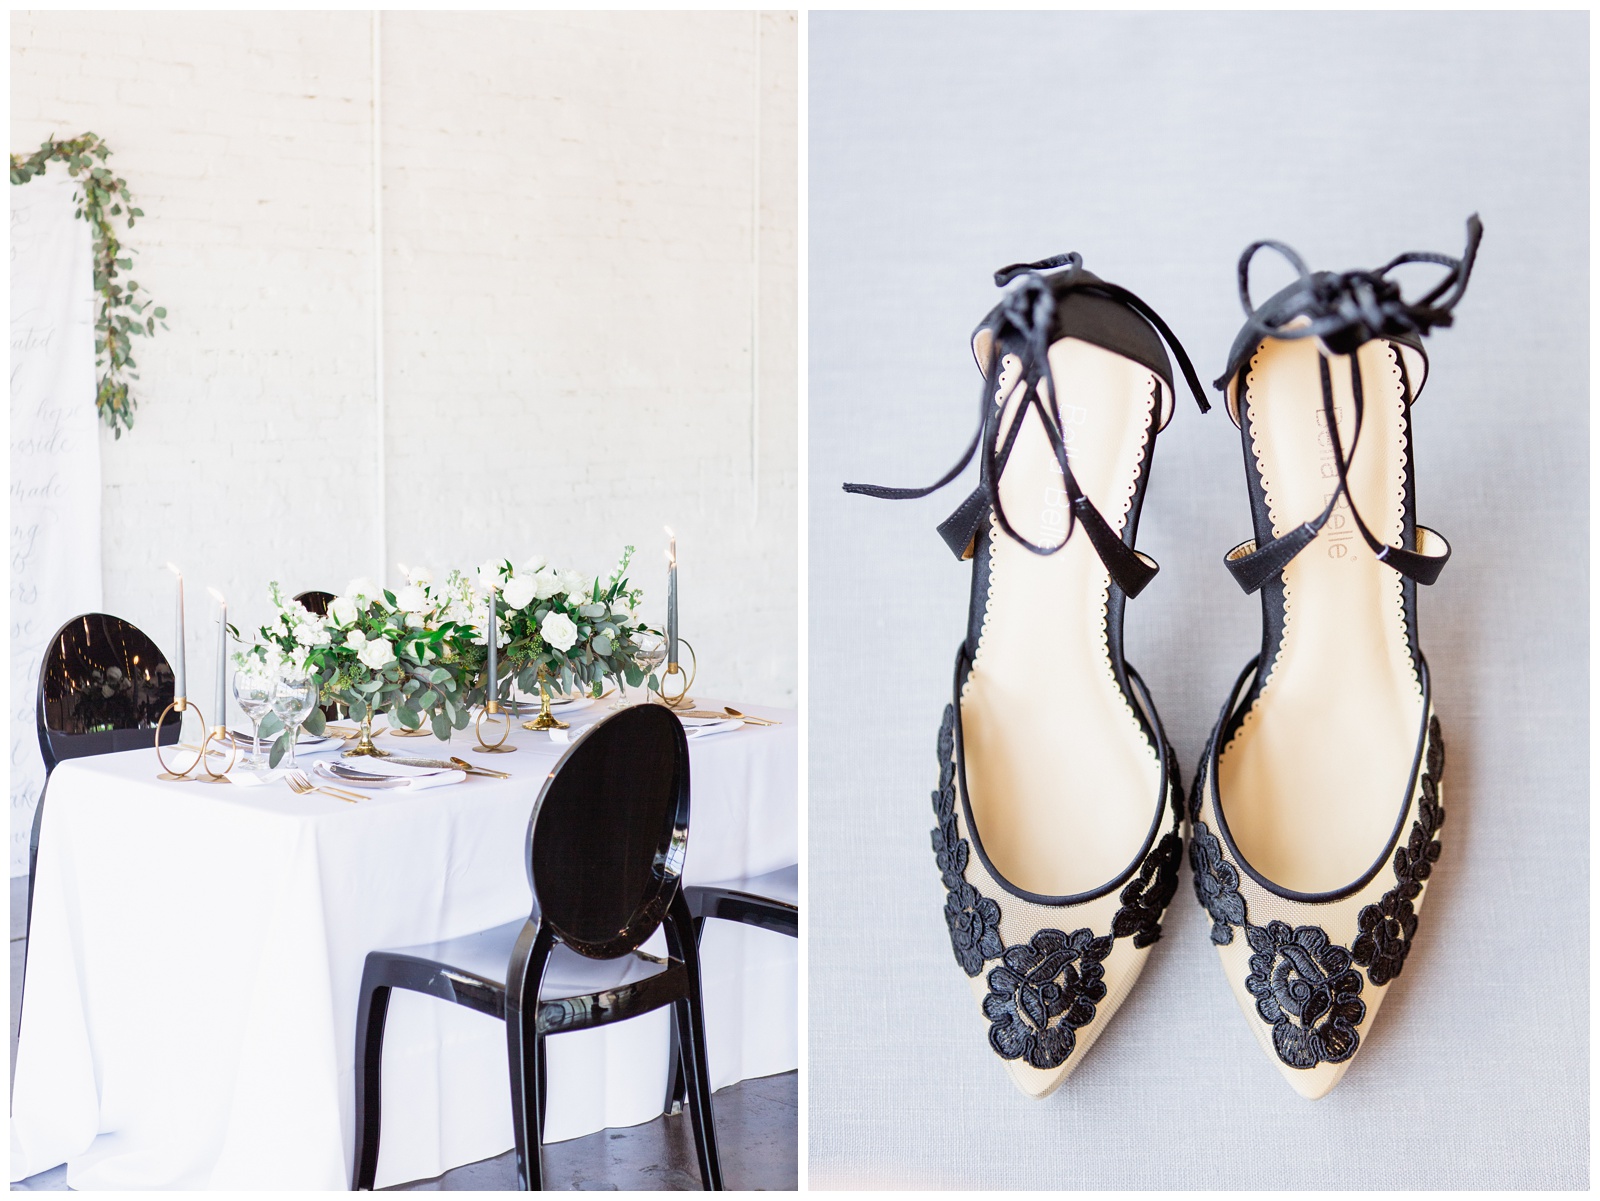 Why is wedding photography so expensive? | Wedding shoes and reception